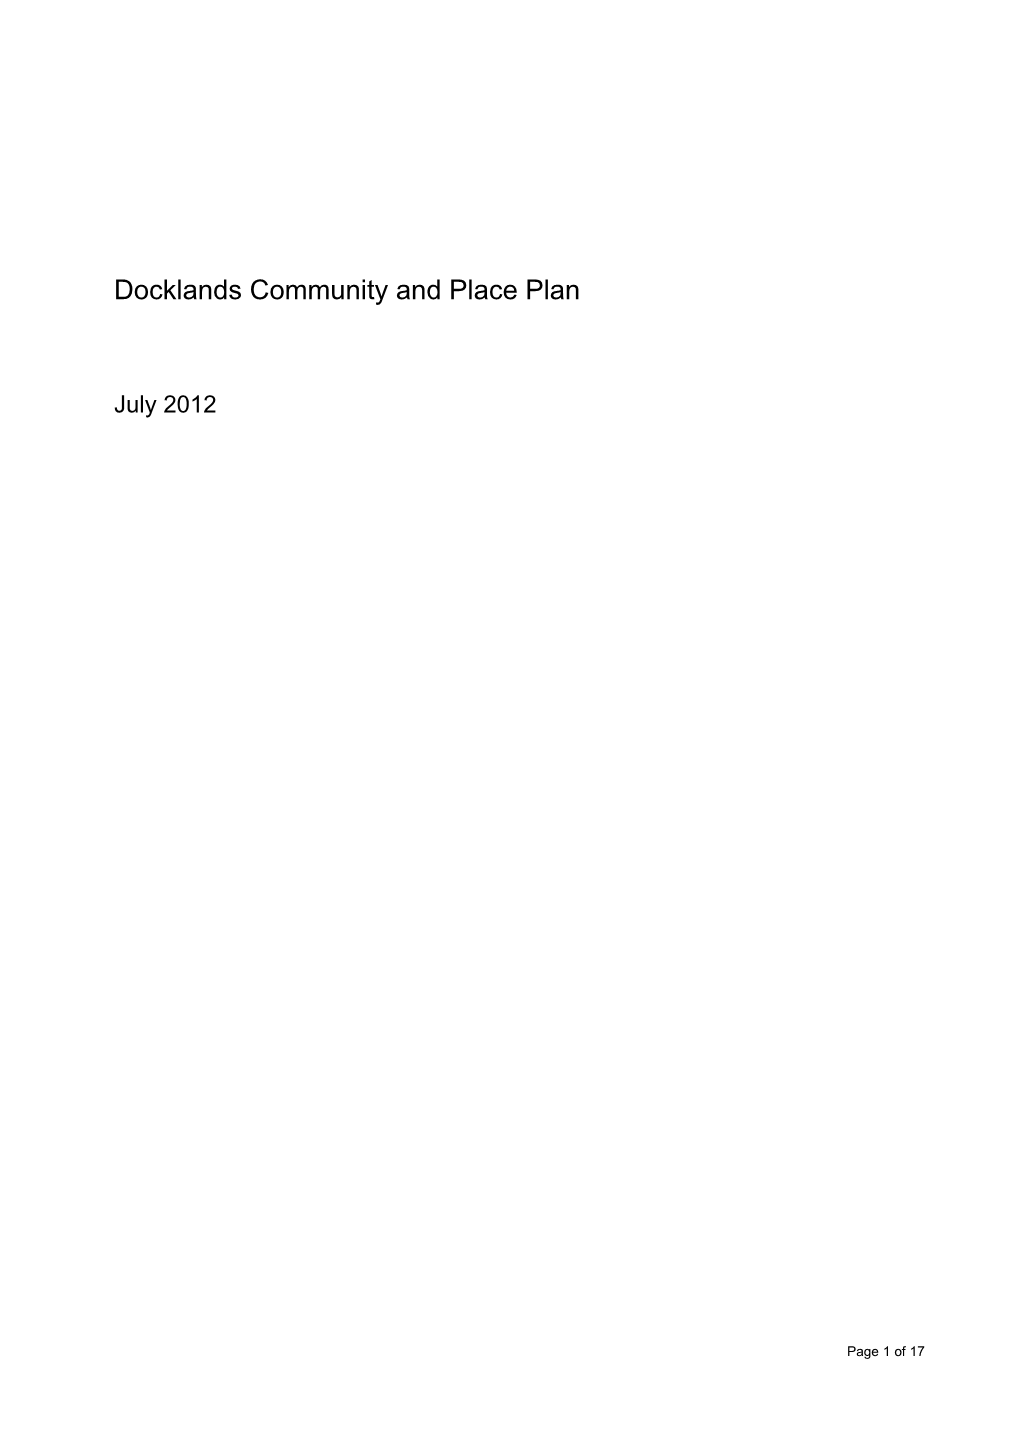 Docklands Community and Place Plan (Text Version)